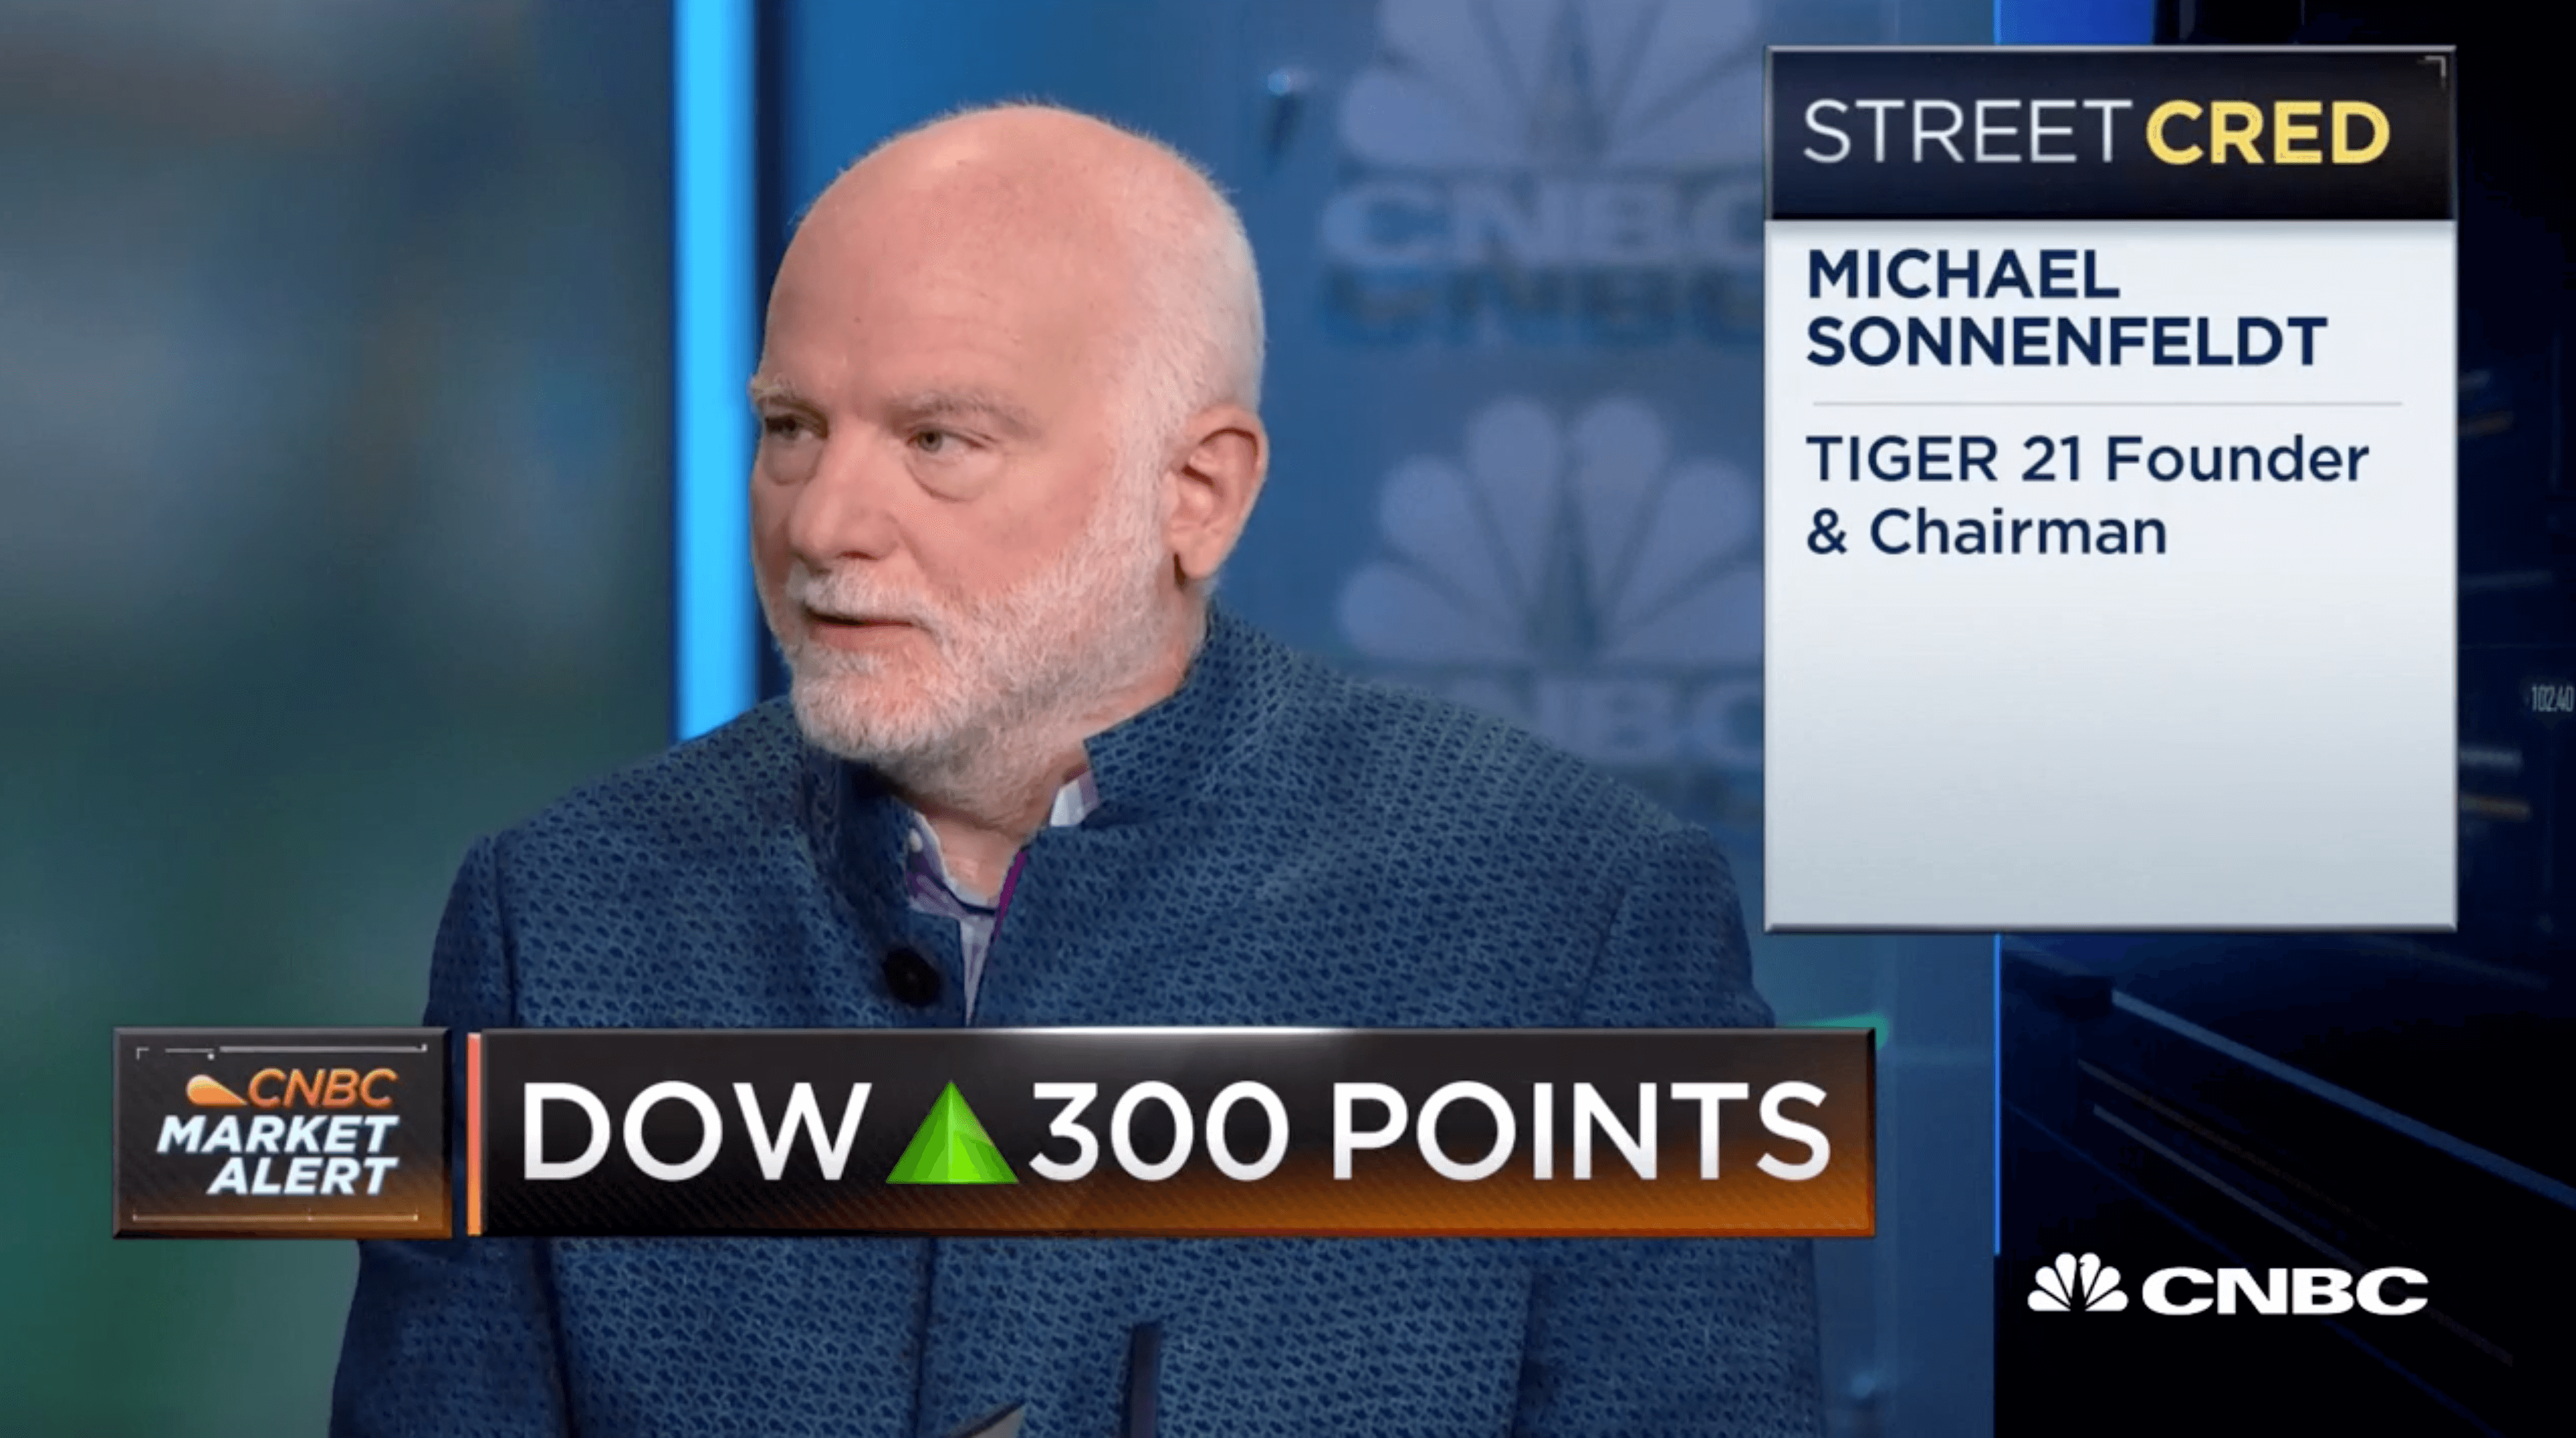 TIGER 21 FOUNDER SHARES ON CNBC WHERE THE WEALTHY ARE PUTTING THEIR MONEY DURING MARKET TURMOIL